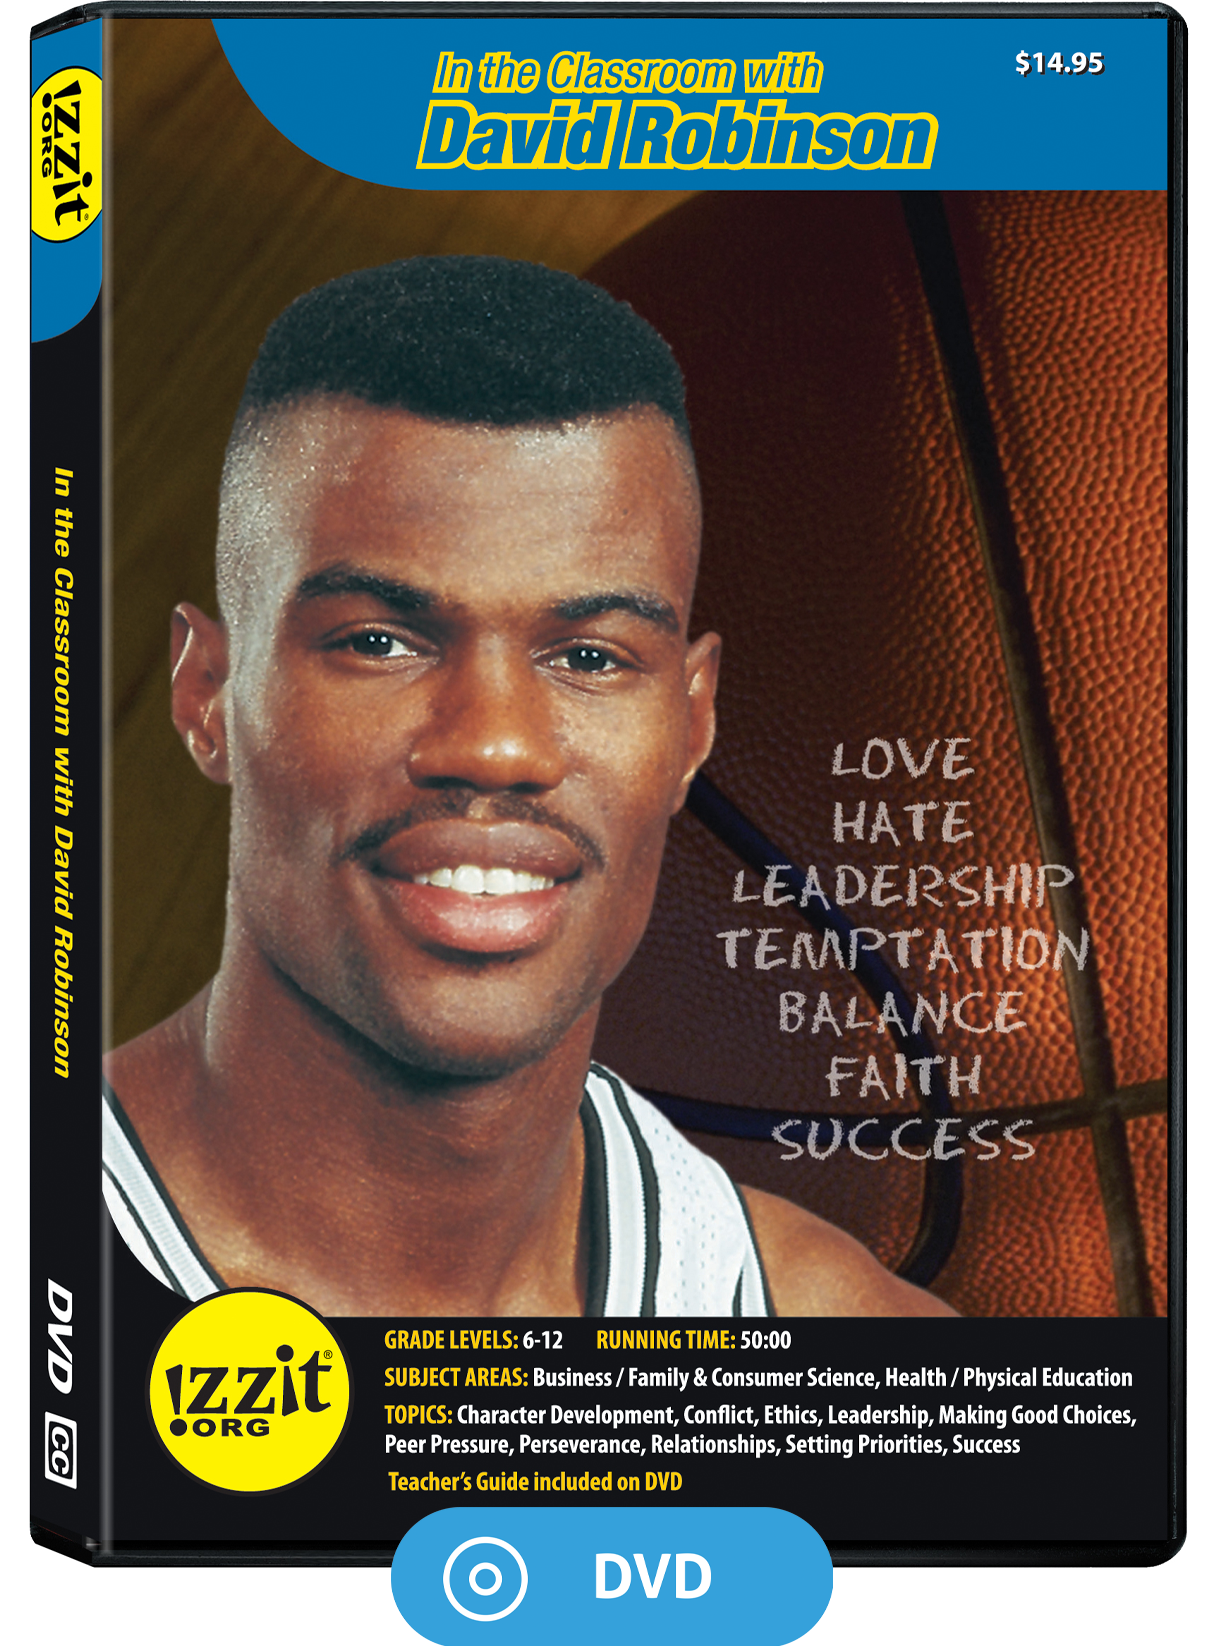 In the Classroom with David Robinson DVD